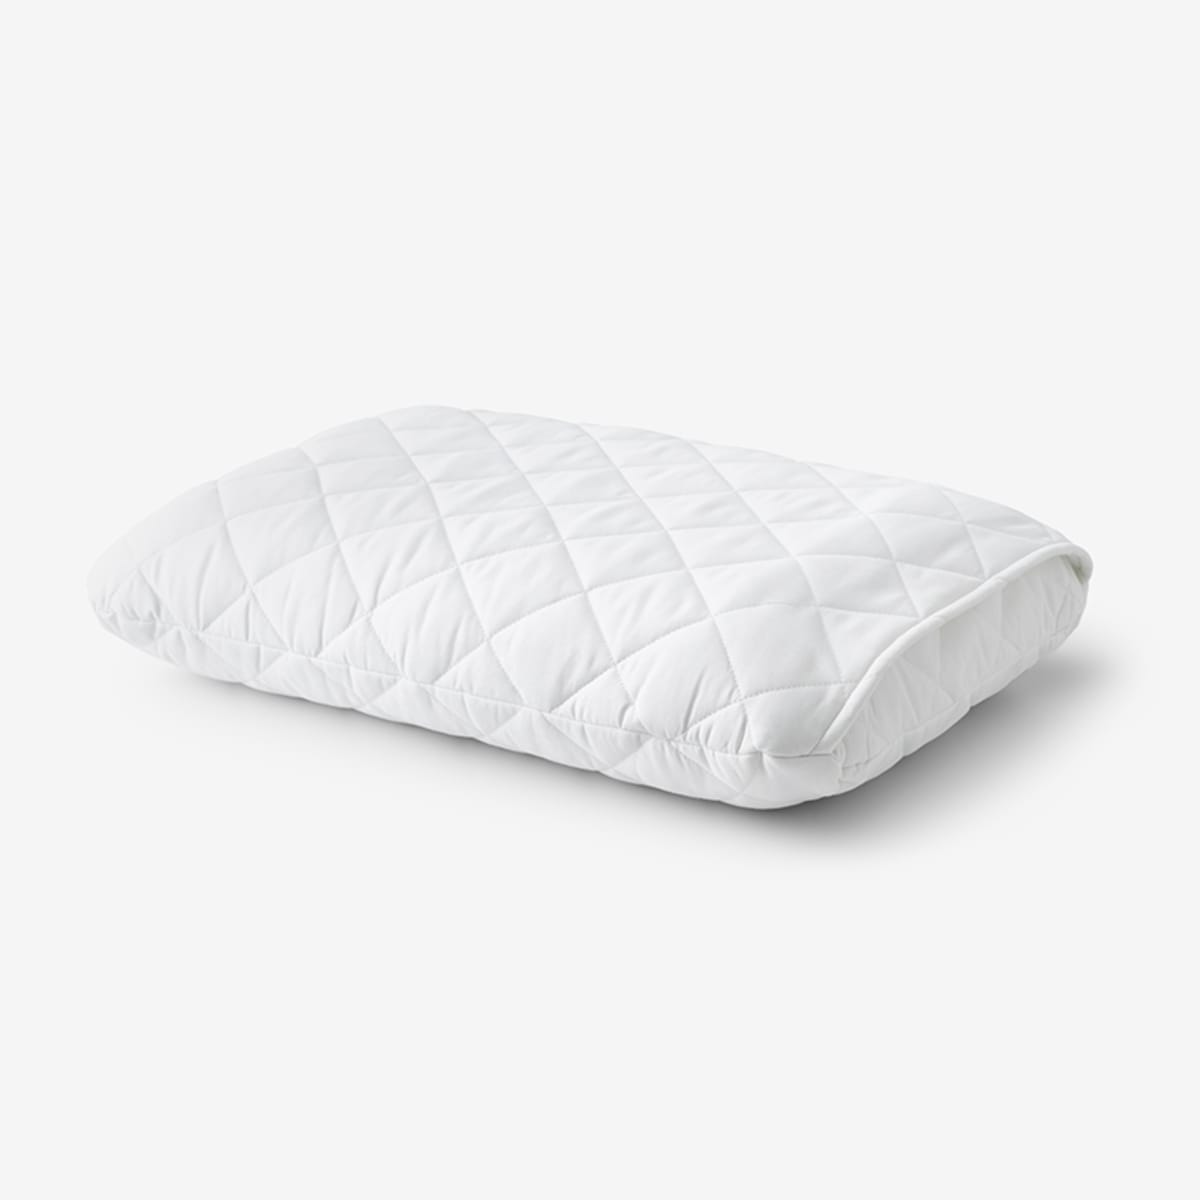 Firm Support Memory Foam Pillow | The Company Store